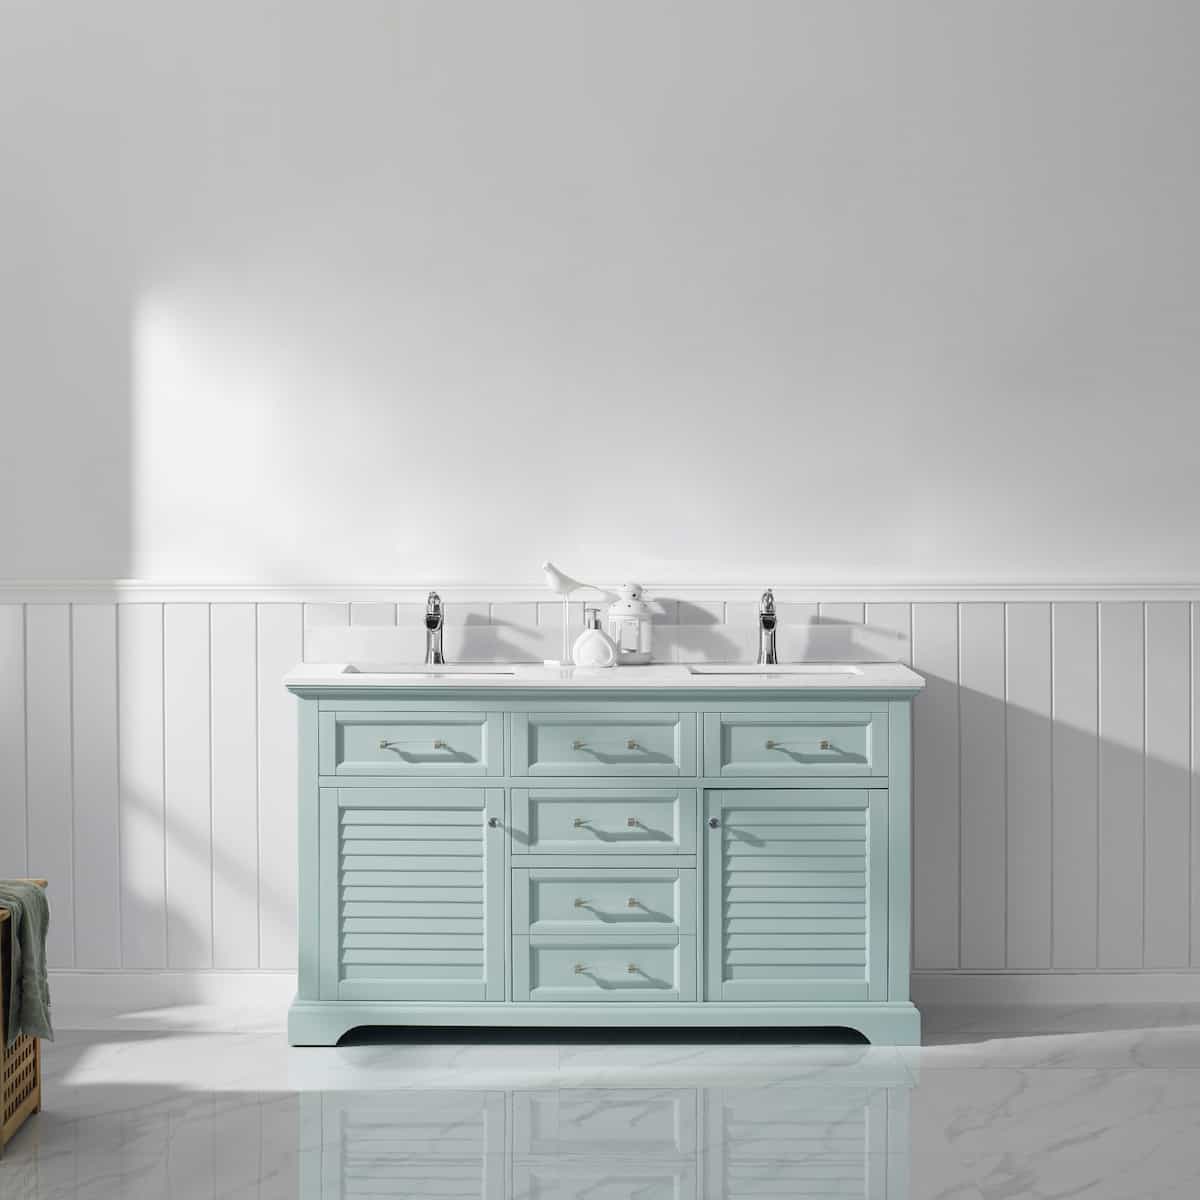 Vinnova Lorna 60 Inch Finnish Green Freestanding Double Vanity With Composite Carrara White Stone Countertop Without Mirror in Bathroom 783060-FG-WS-NM